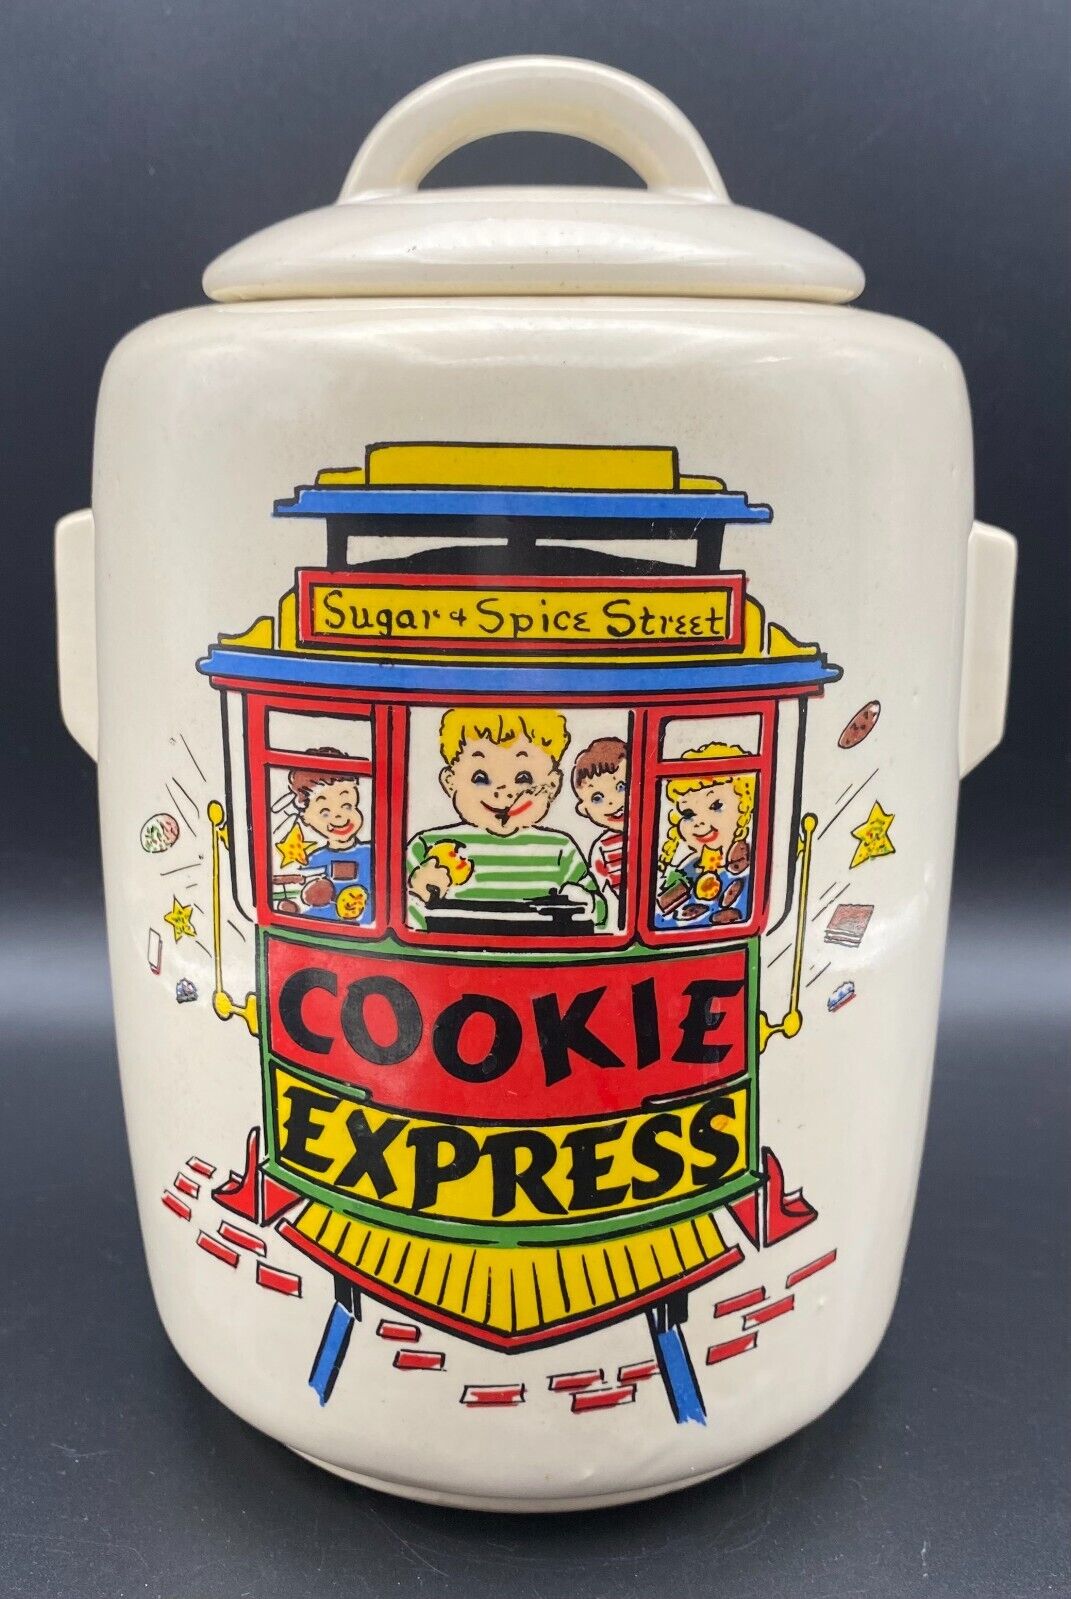 Vintage McCoy Pottery Sugar & Spice Street Cookie Express Cookie Jar Canister